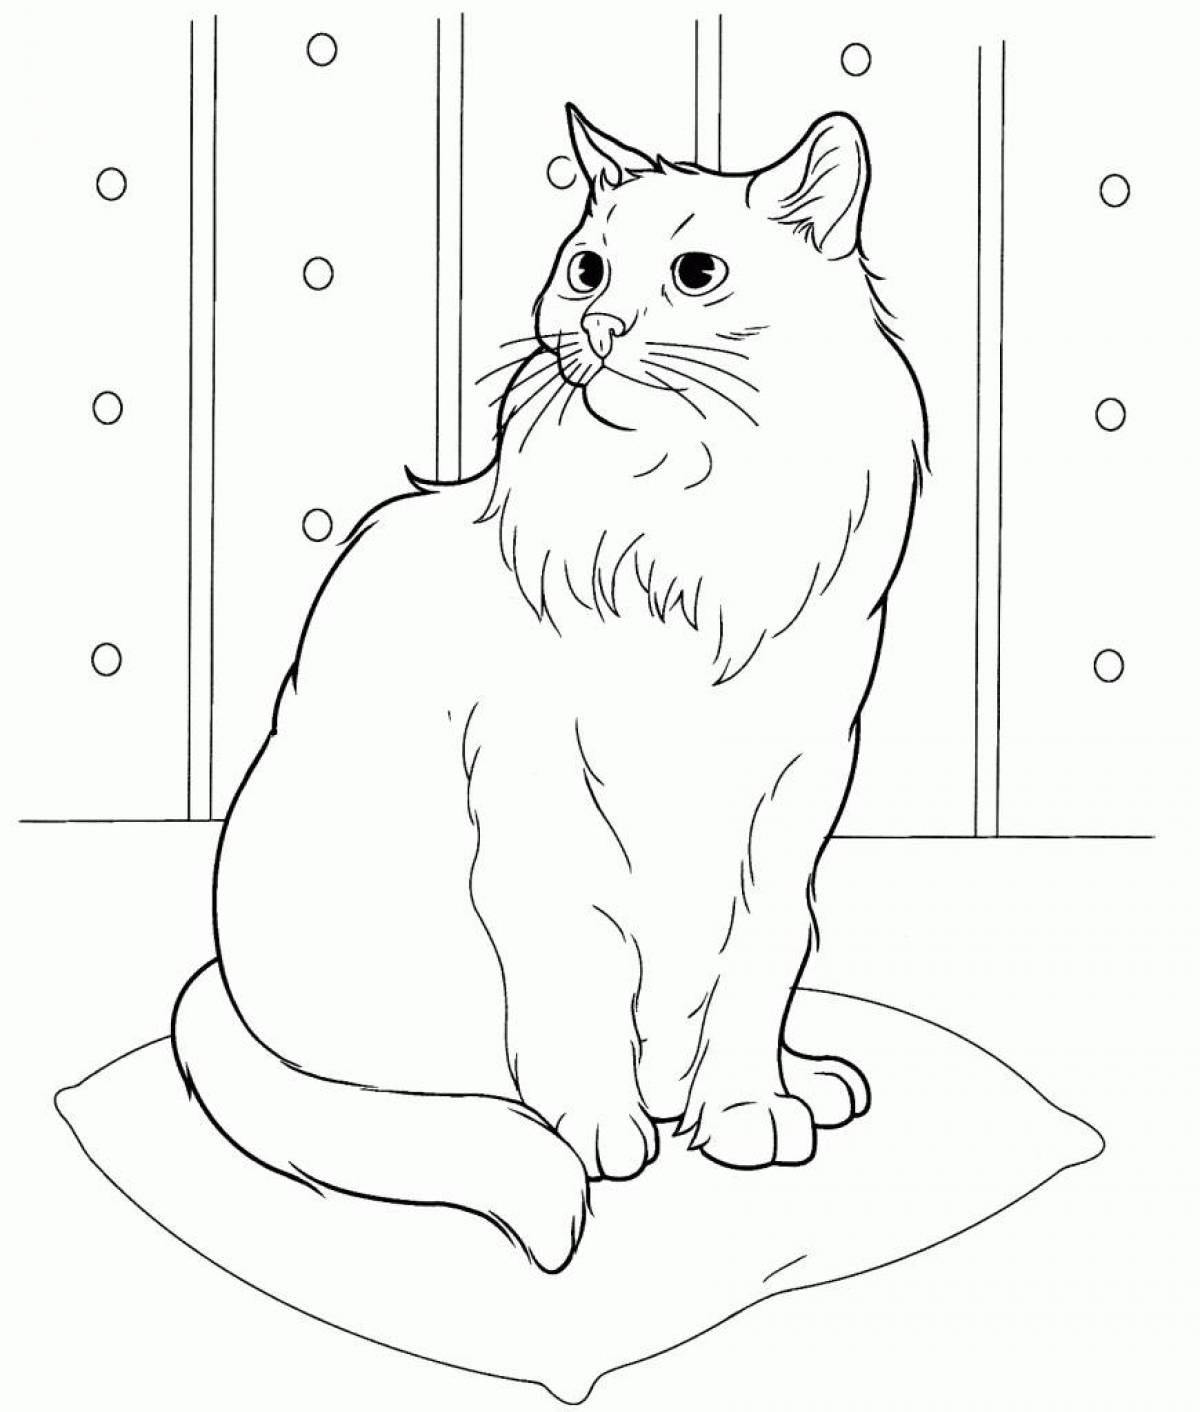 Coloring book shiny cat